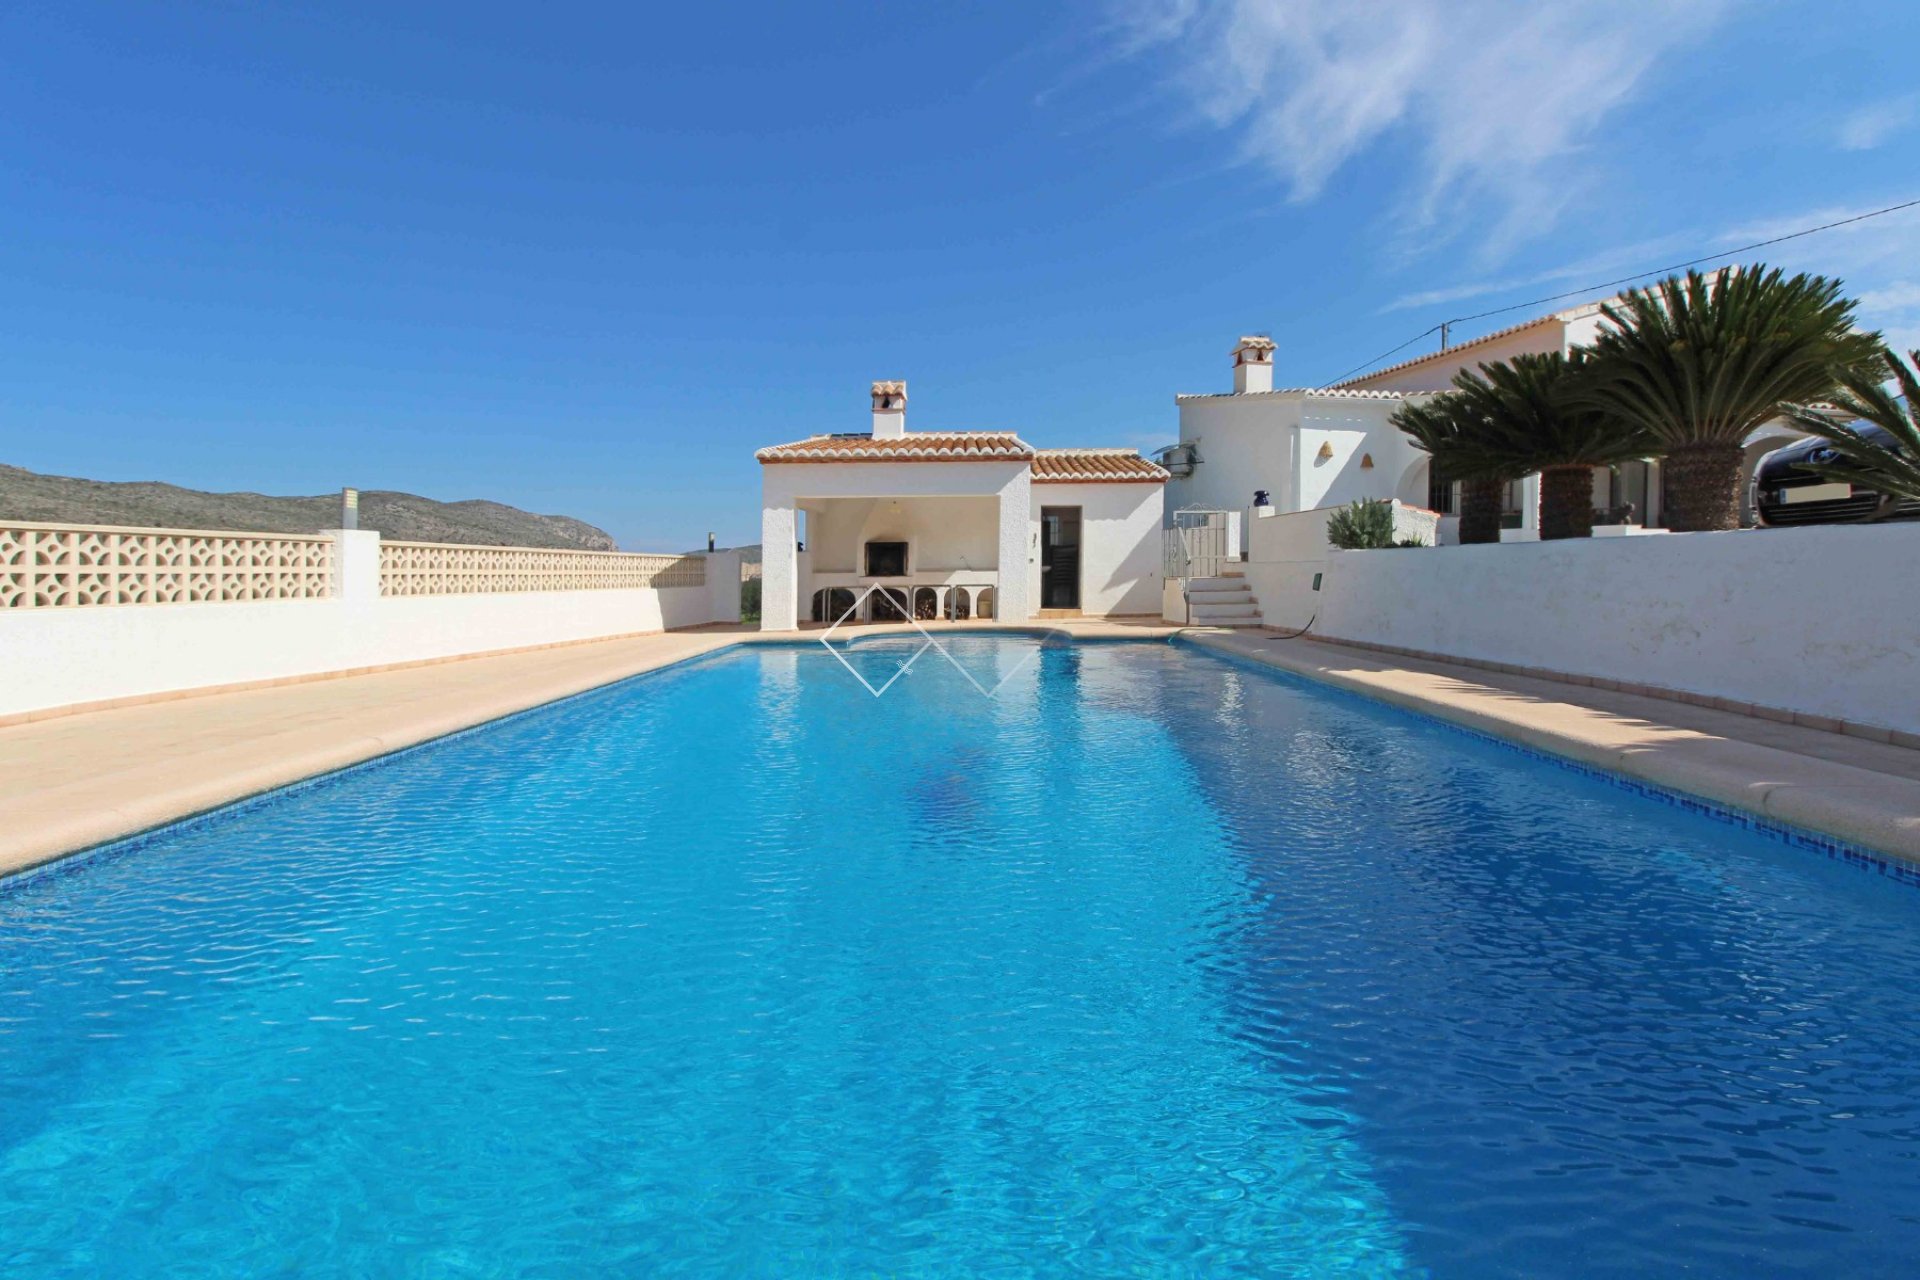 pool - Finca for sale in Benissa, Canor 5 minutes from Benissa village